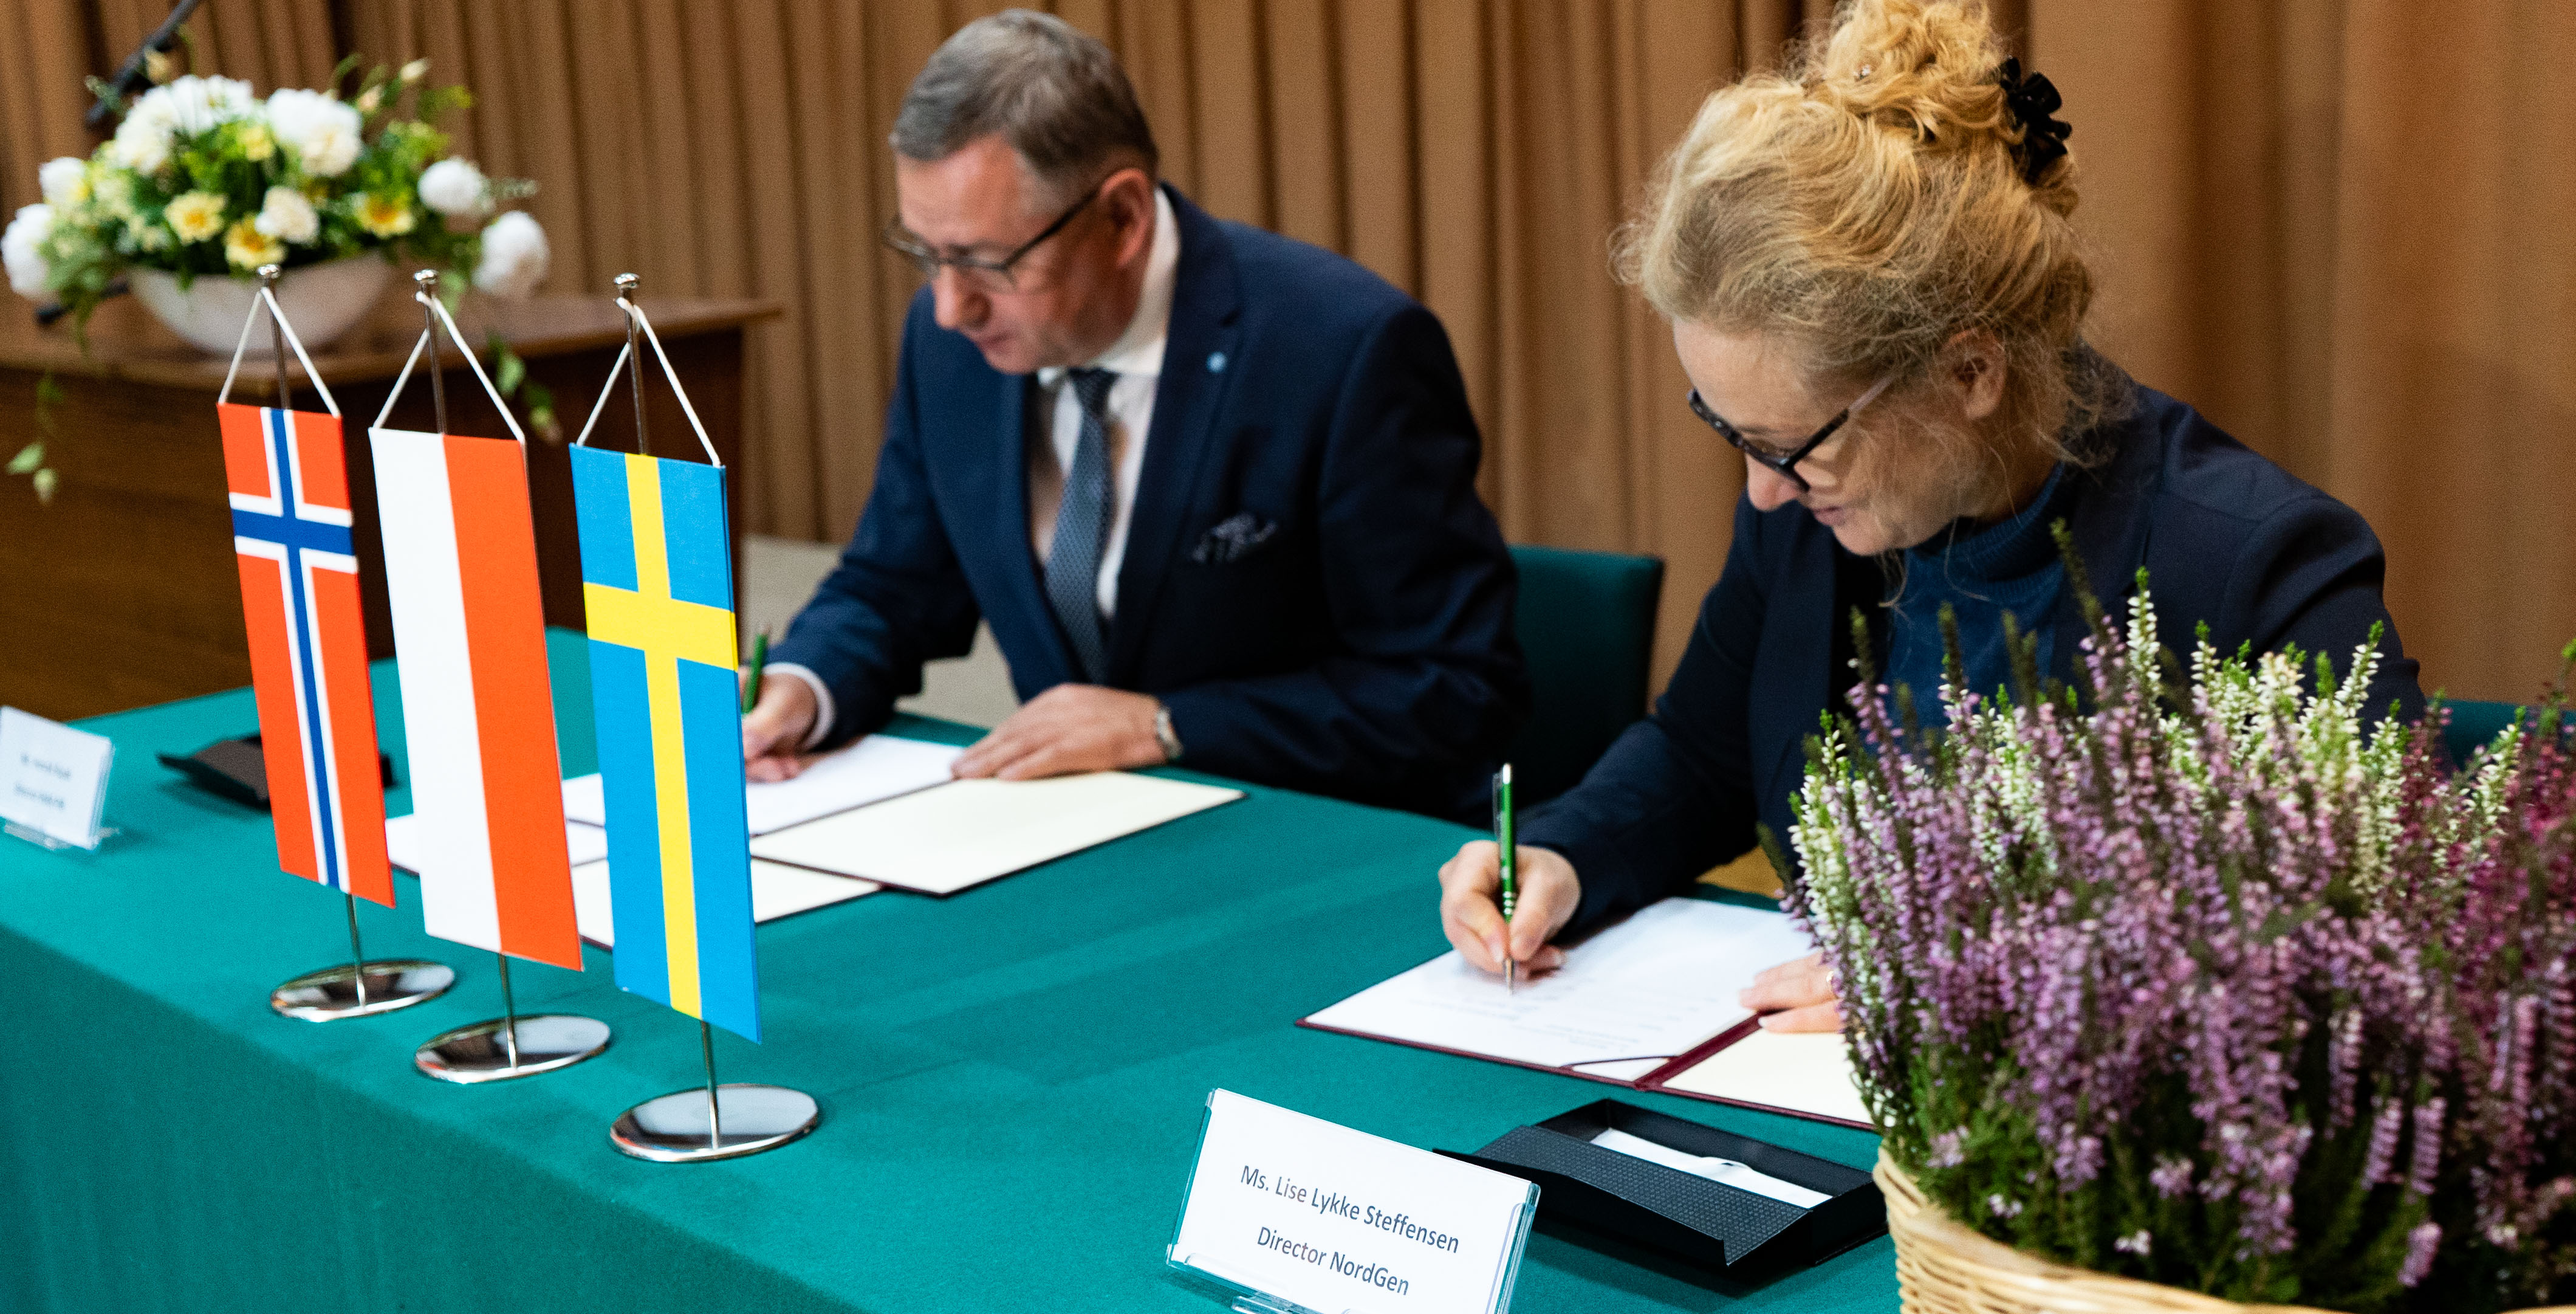 Henryk Bujak, head of IHAR, signed the depositor’s agreement with NordGen director Lise Lykke Steffensen, acting on behalf of the Norwegian Ministry for Agriculture and Food.